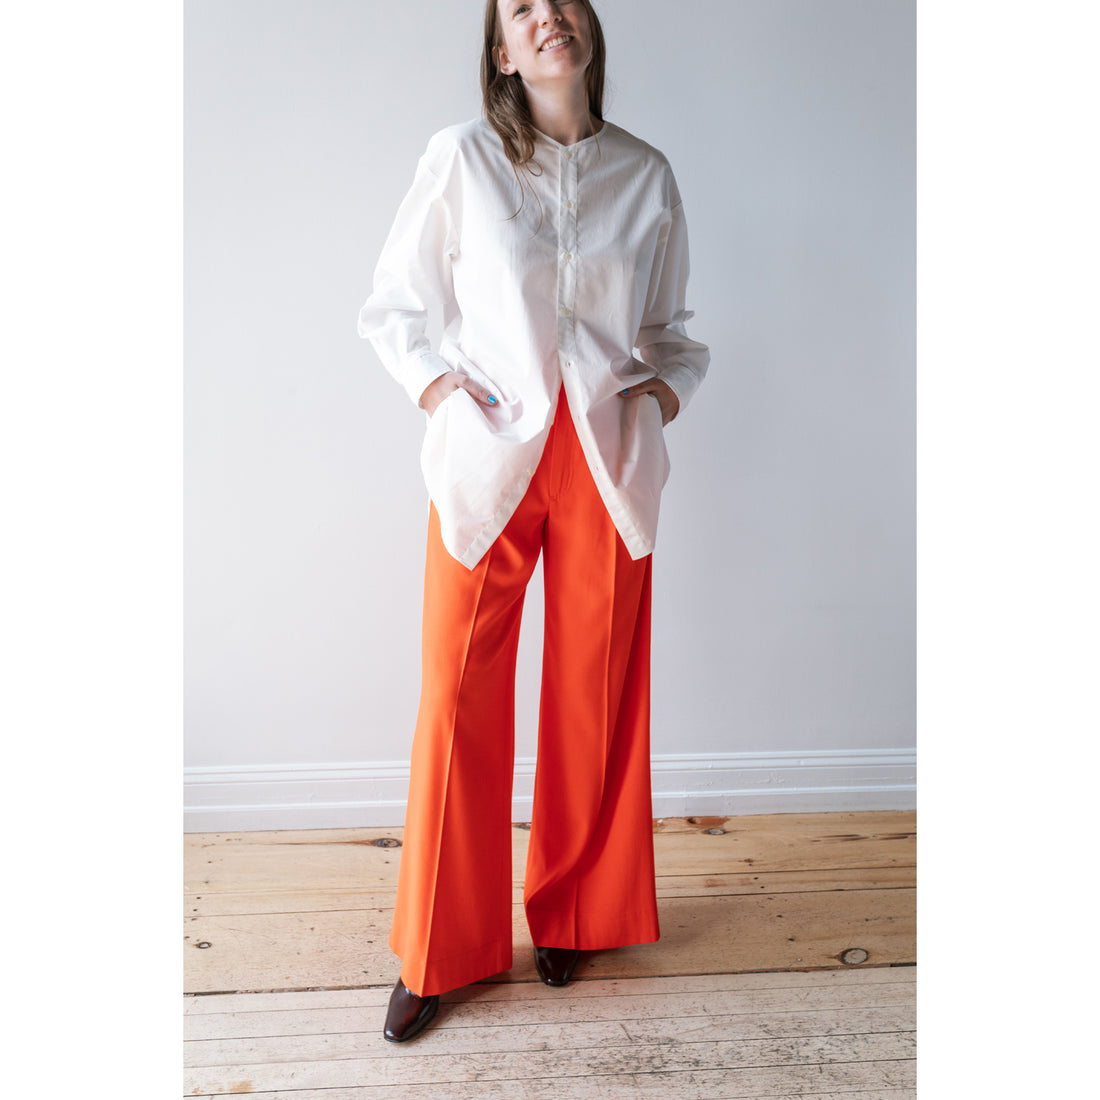 Rodebjer Addie Trouser in Cherry Tomato